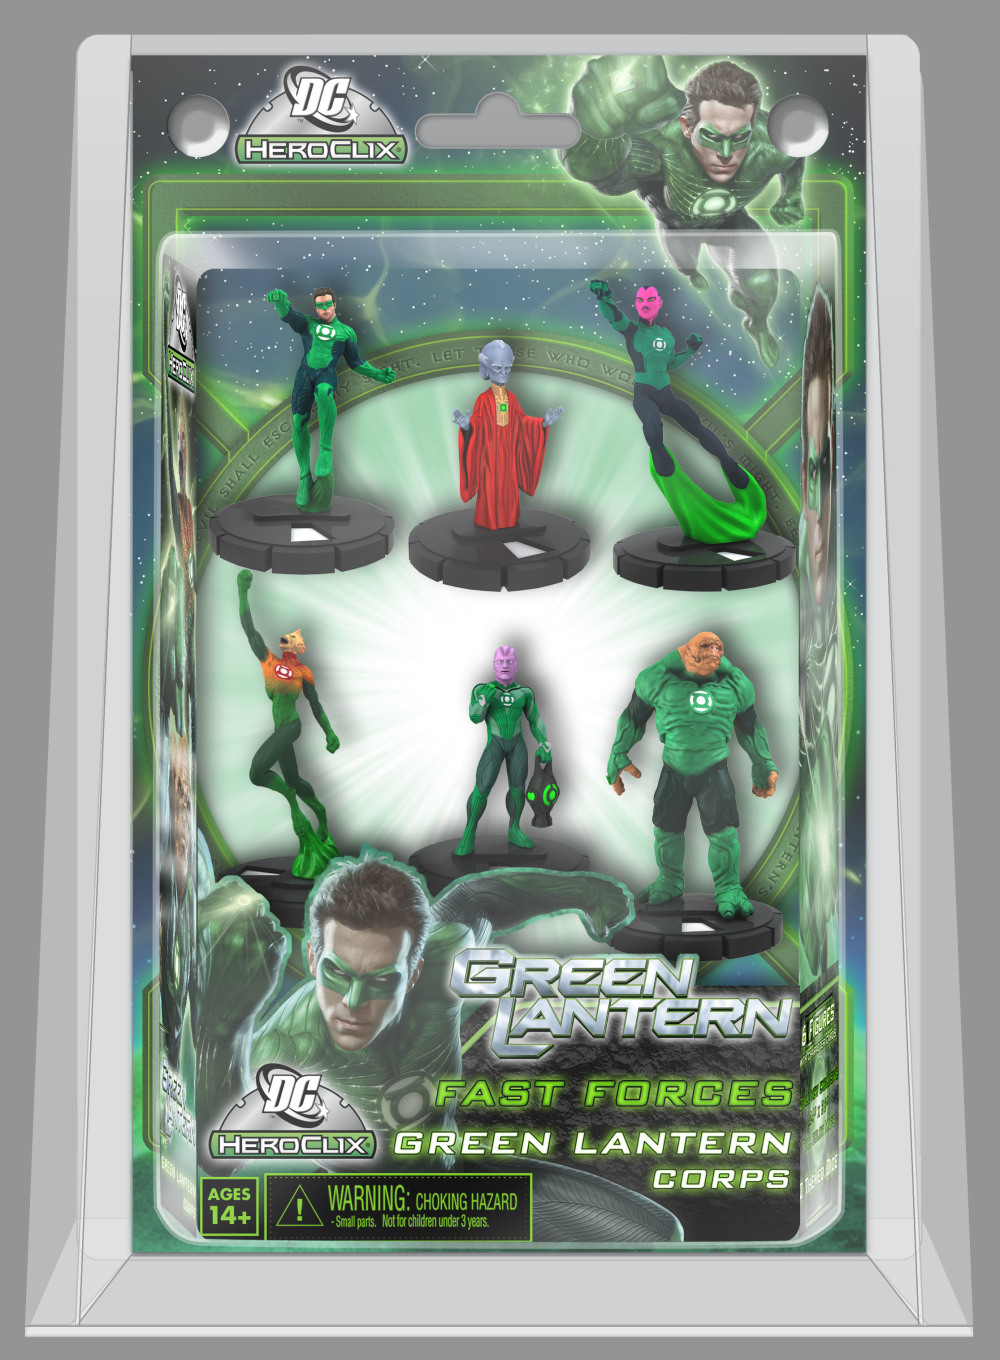 Personages Green Lantern onthuld